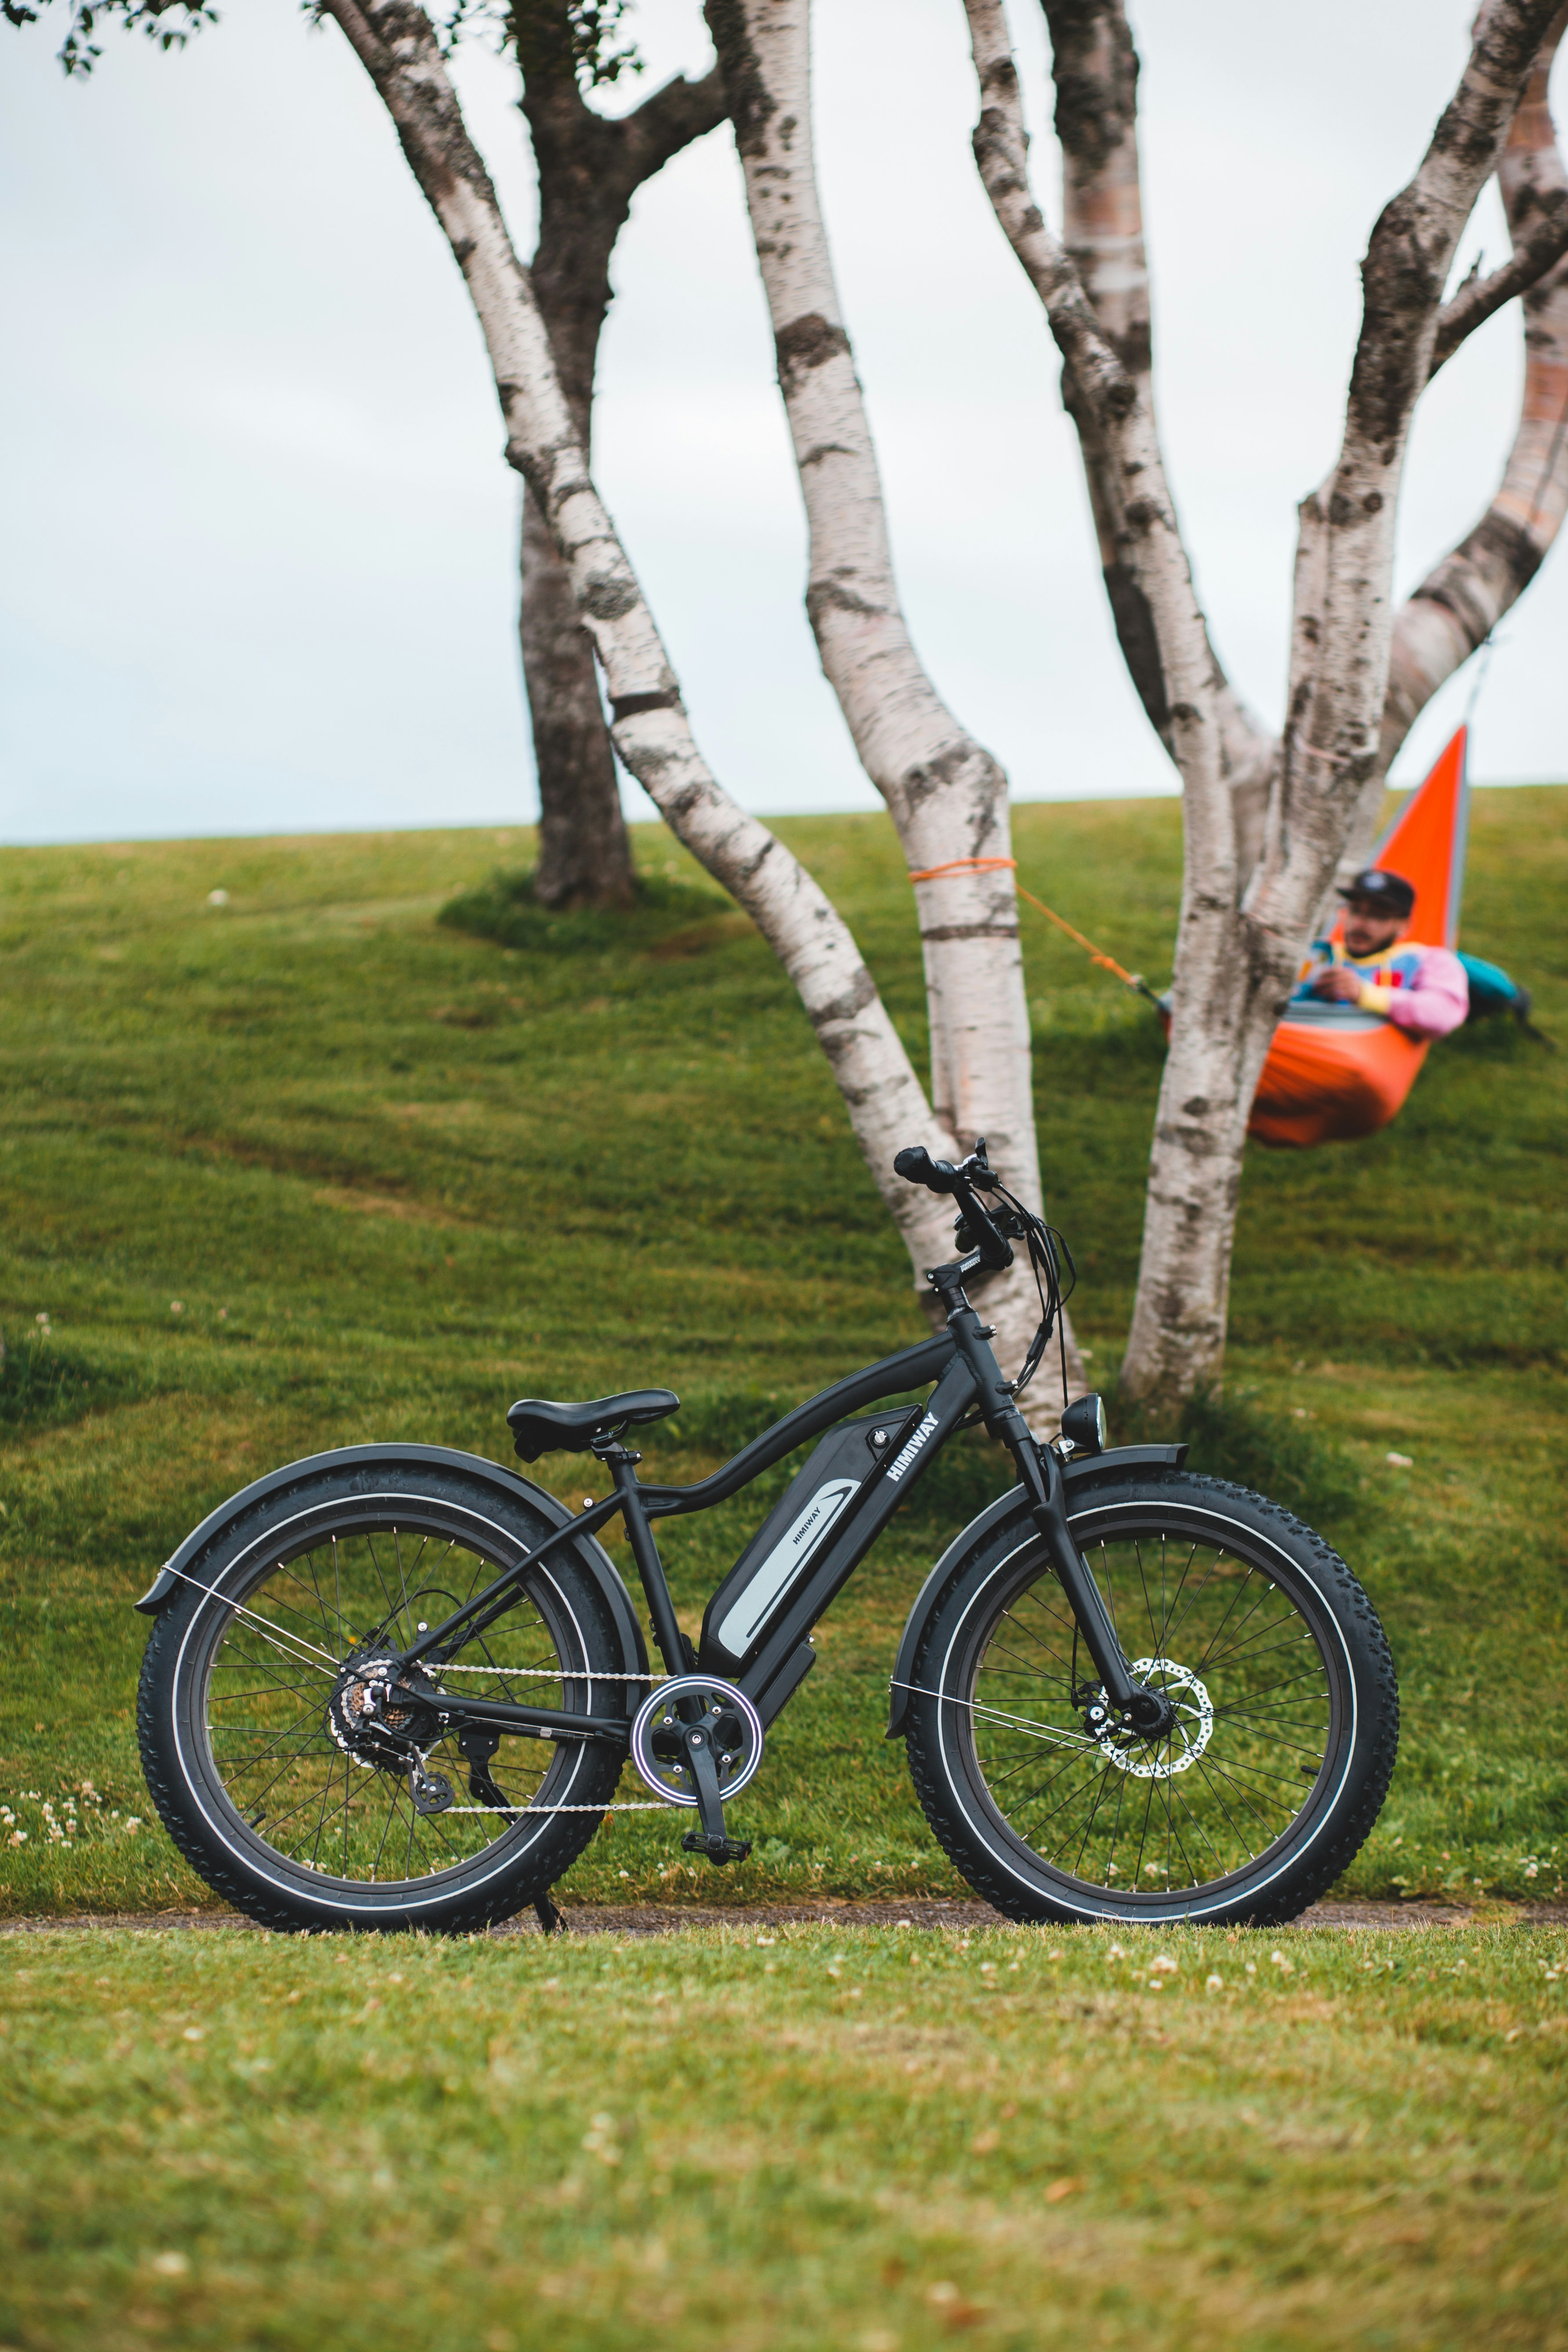 black and gray mountain bike on green grass field during daytime